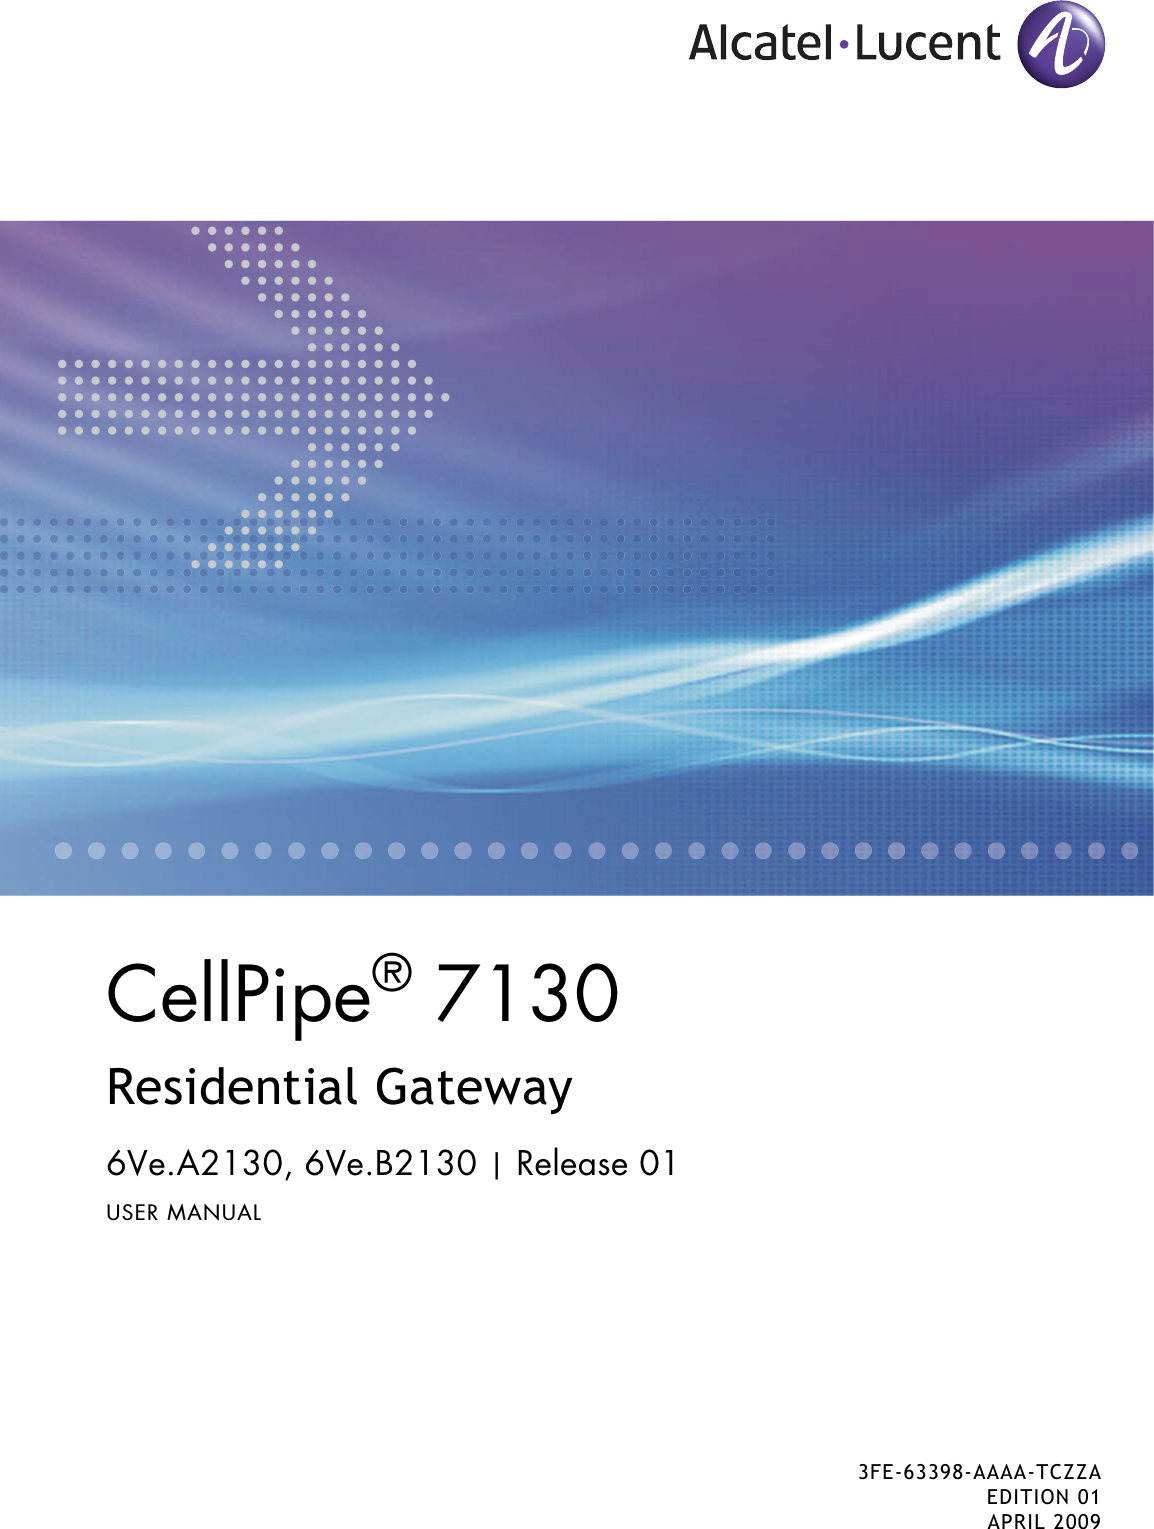 CellPipe® 7130 Residential Gateway6Ve.A2130, 6Ve.B2130 | Release 01USER MANUAL3FE-63398-AAAA-TCZZAEDITION 01APRIL 2009